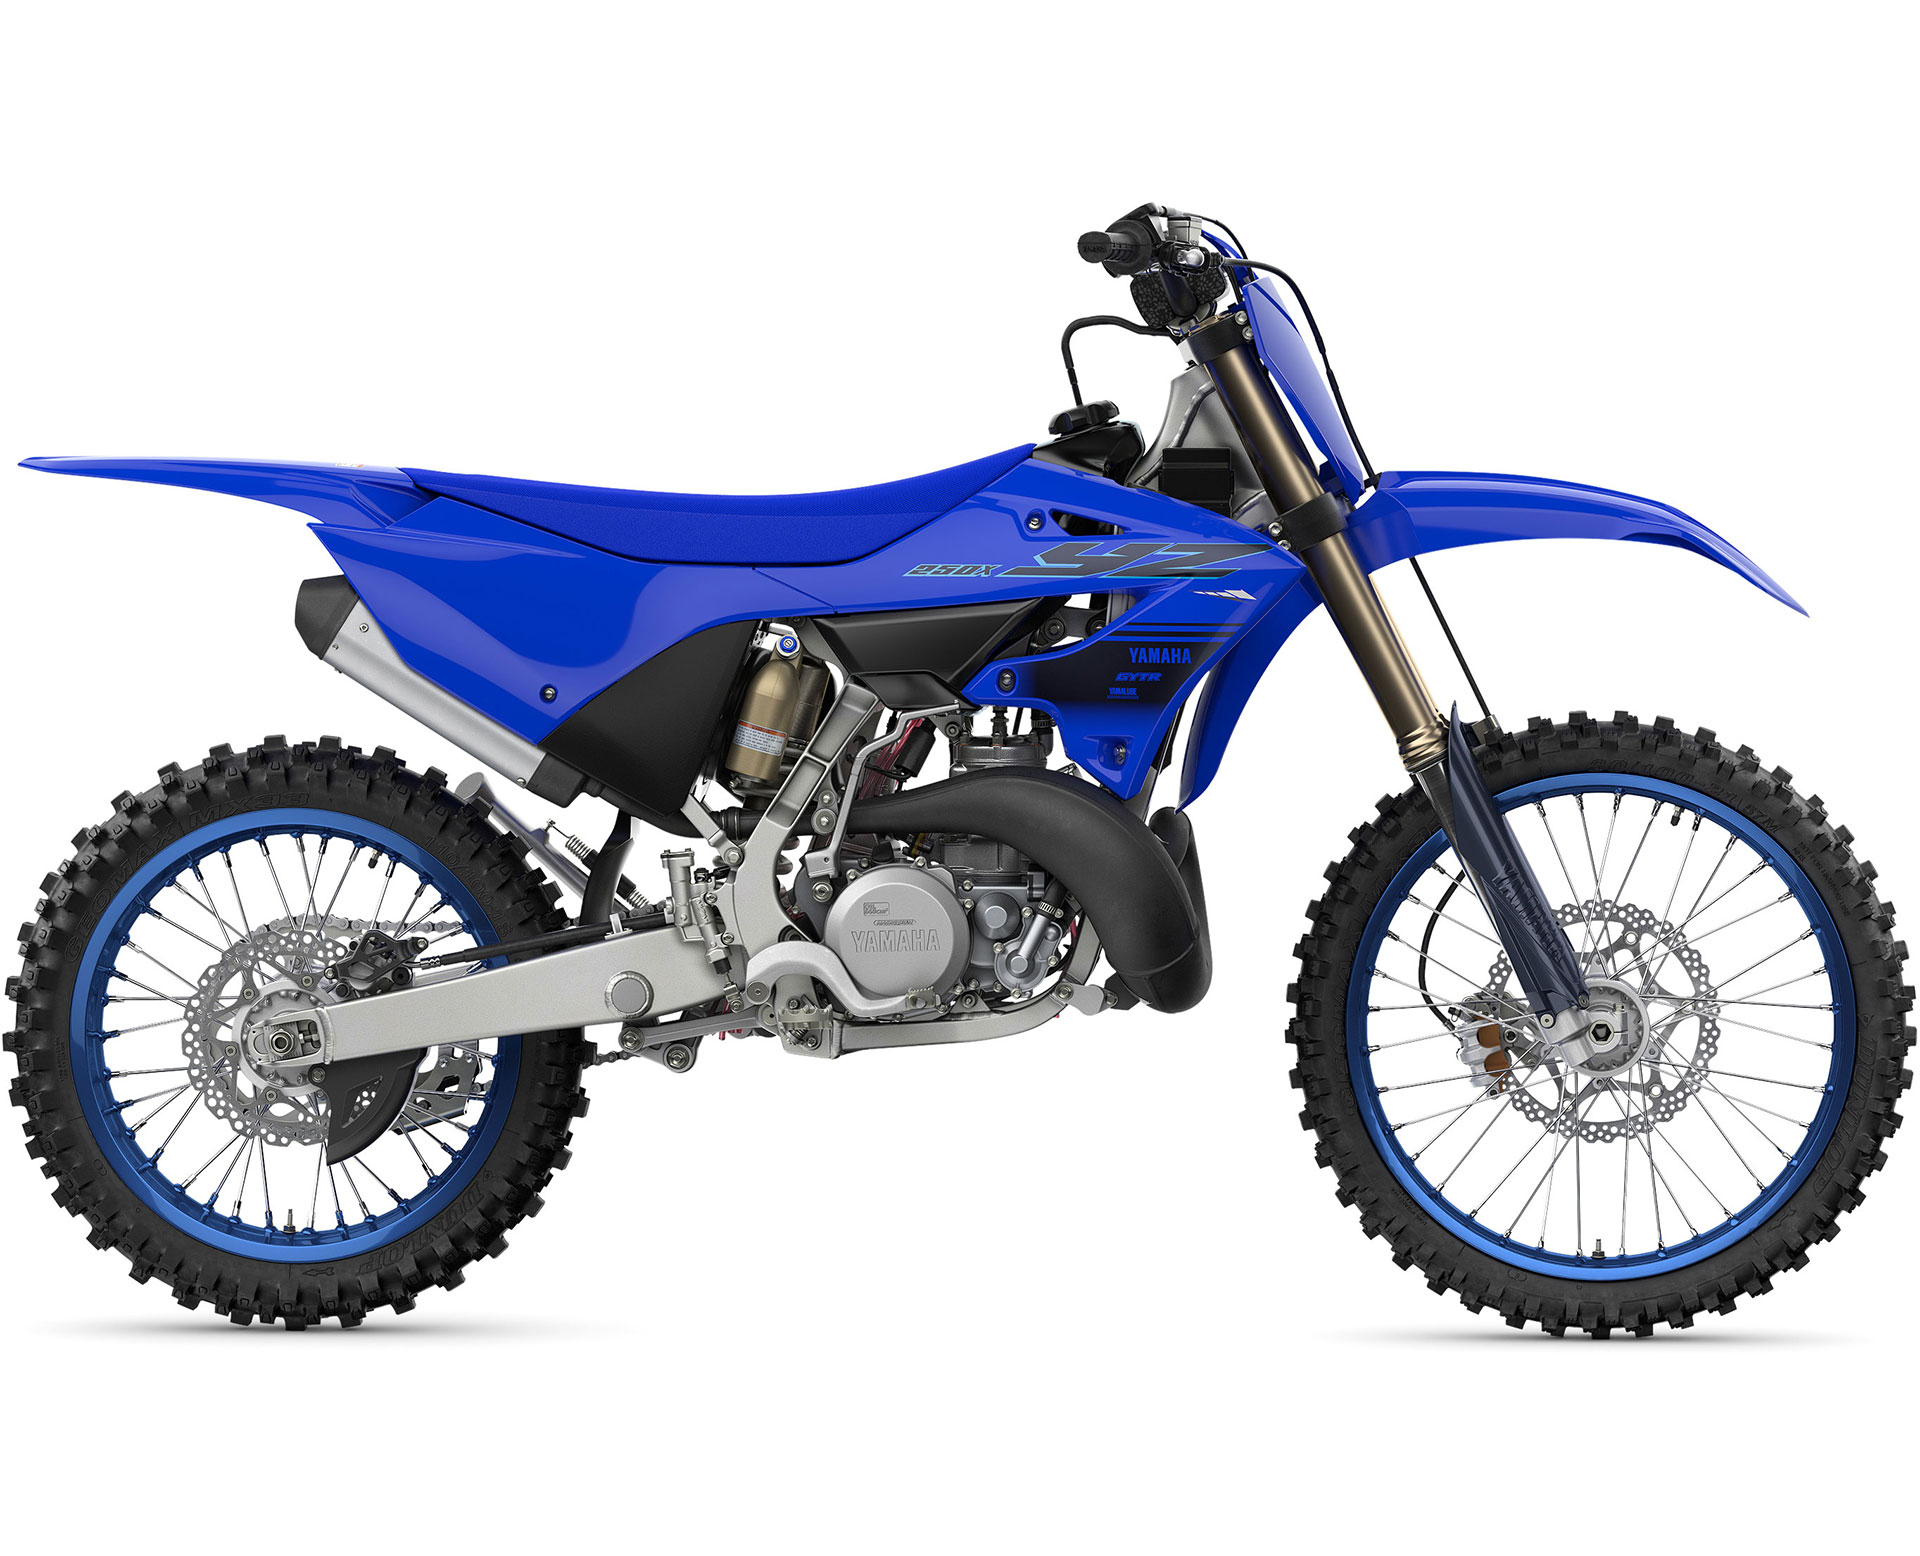 Thumbnail of your customized YZ250X 2024